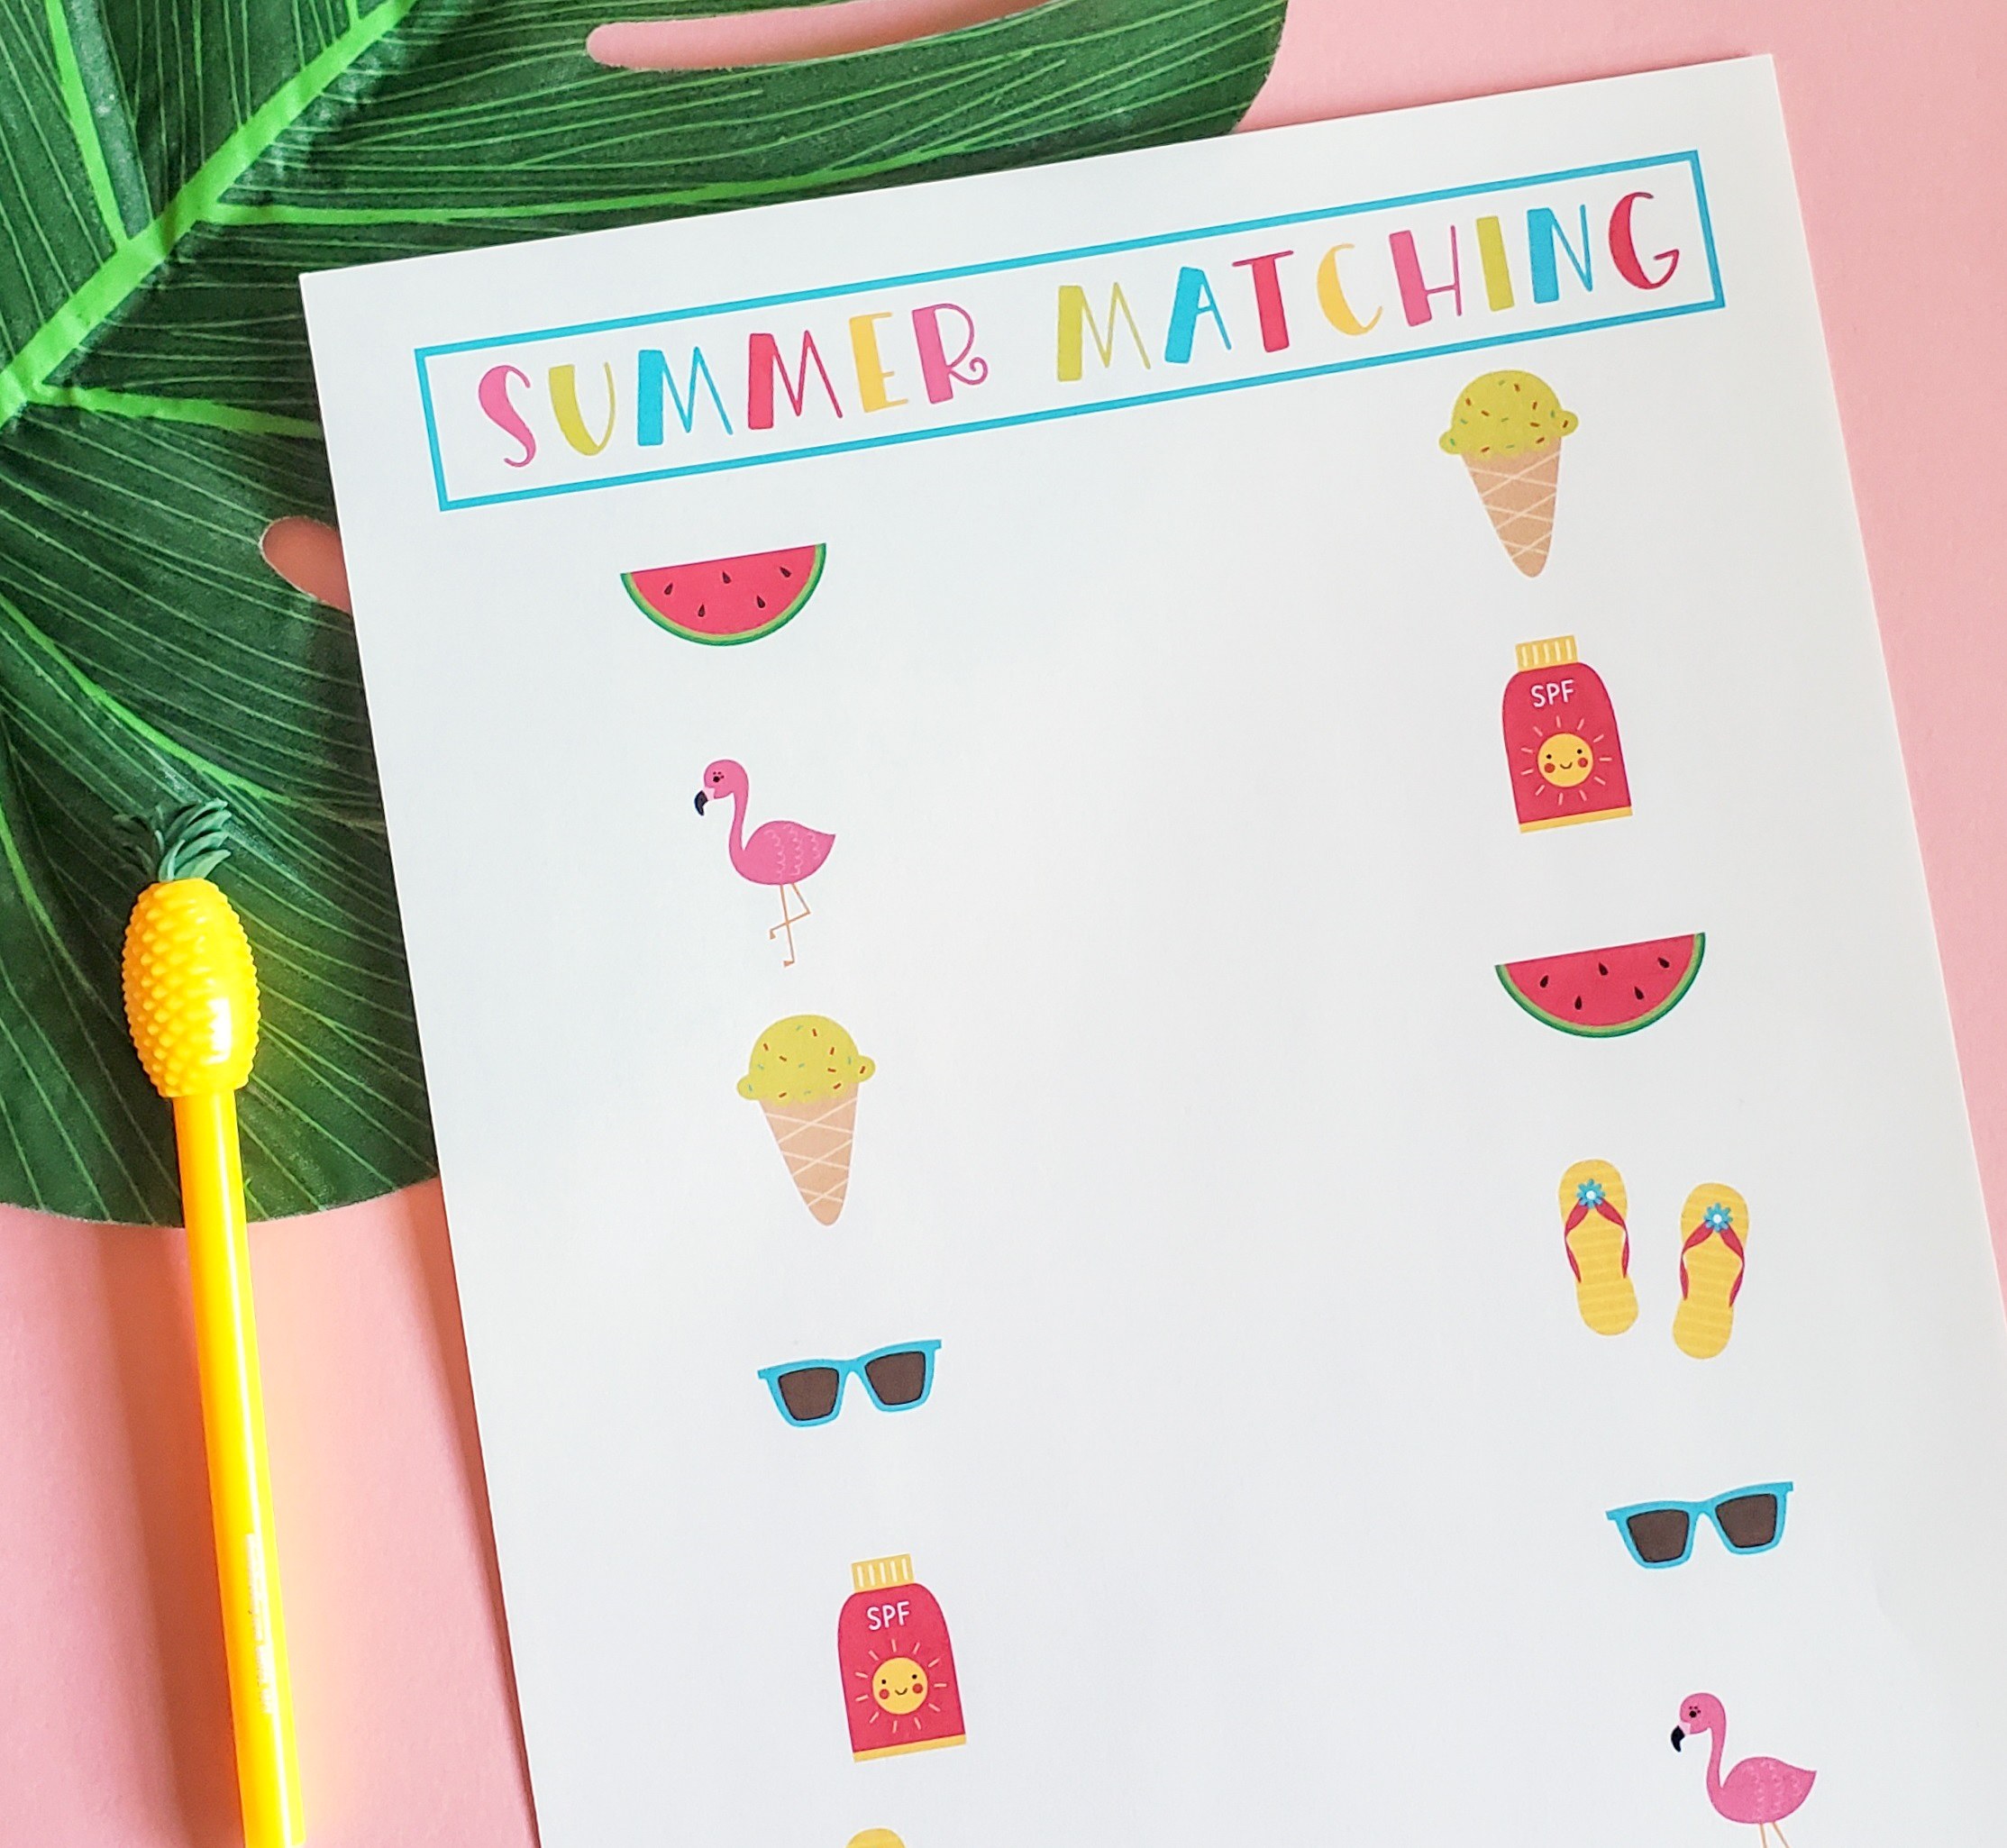 Summer Matching Page